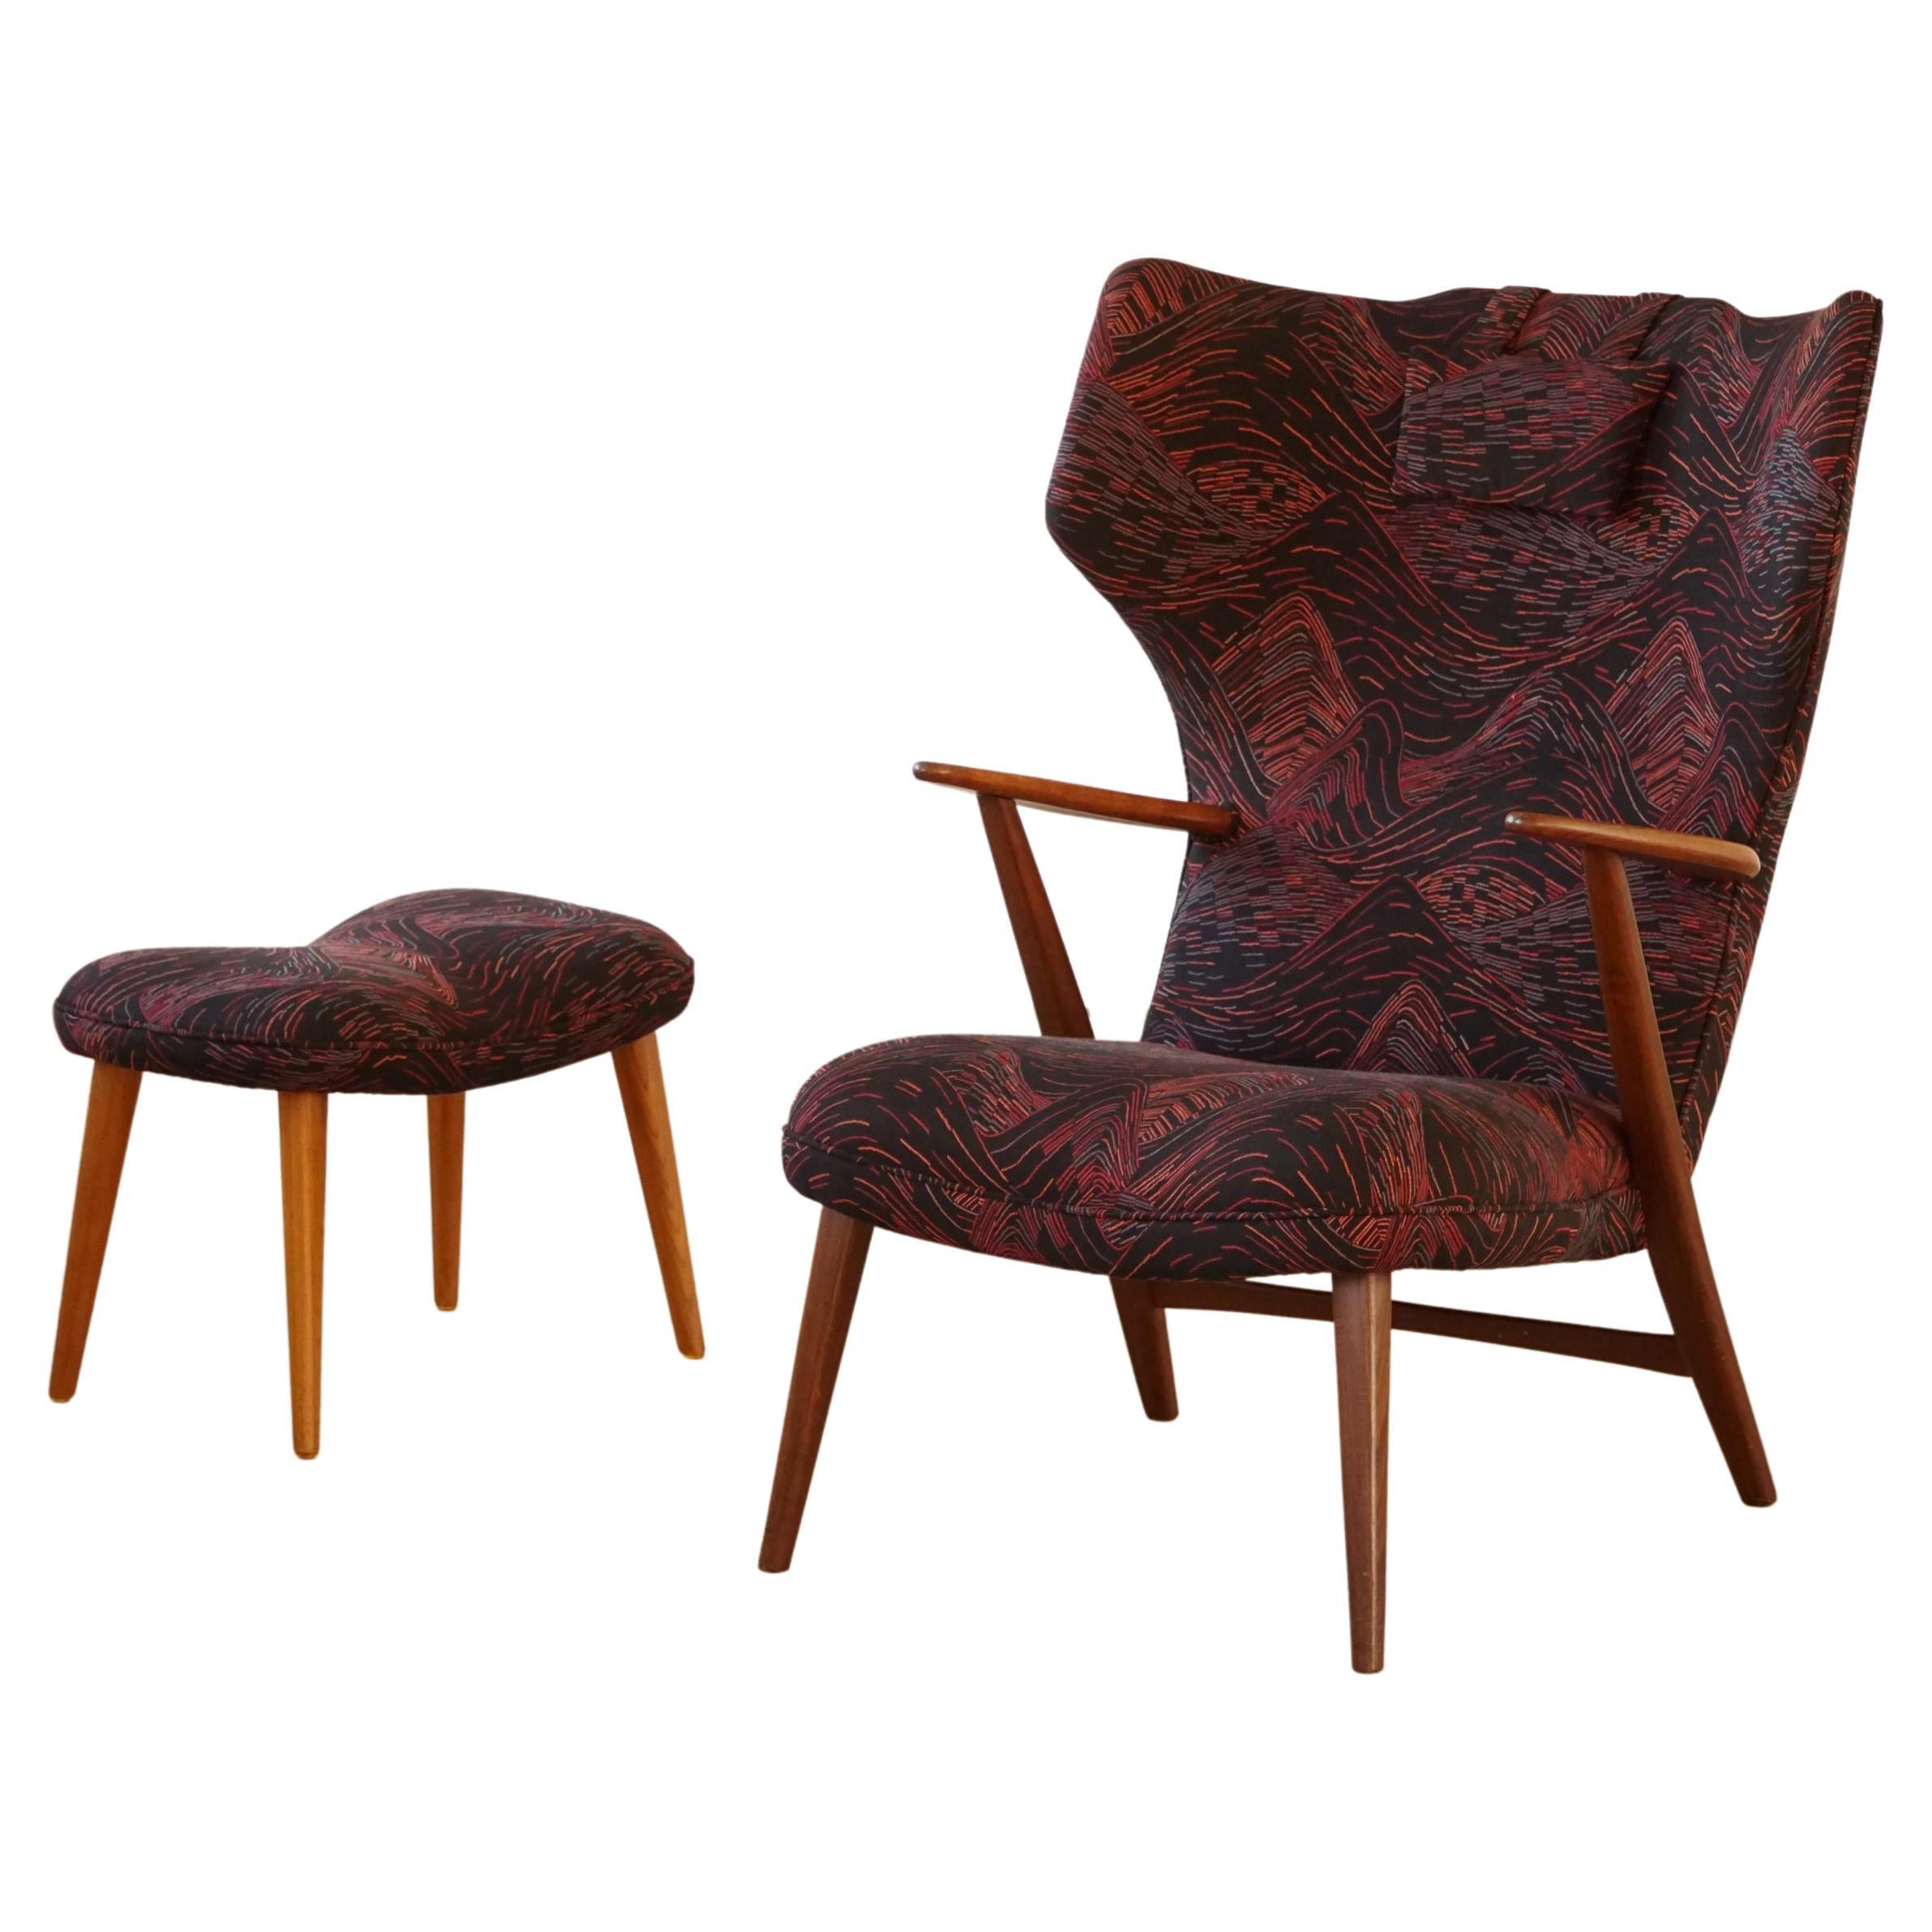 Madsen & Schubell, Wingback Lounge Chair & Stool in Teak, Reupholstered, 1950s  For Sale